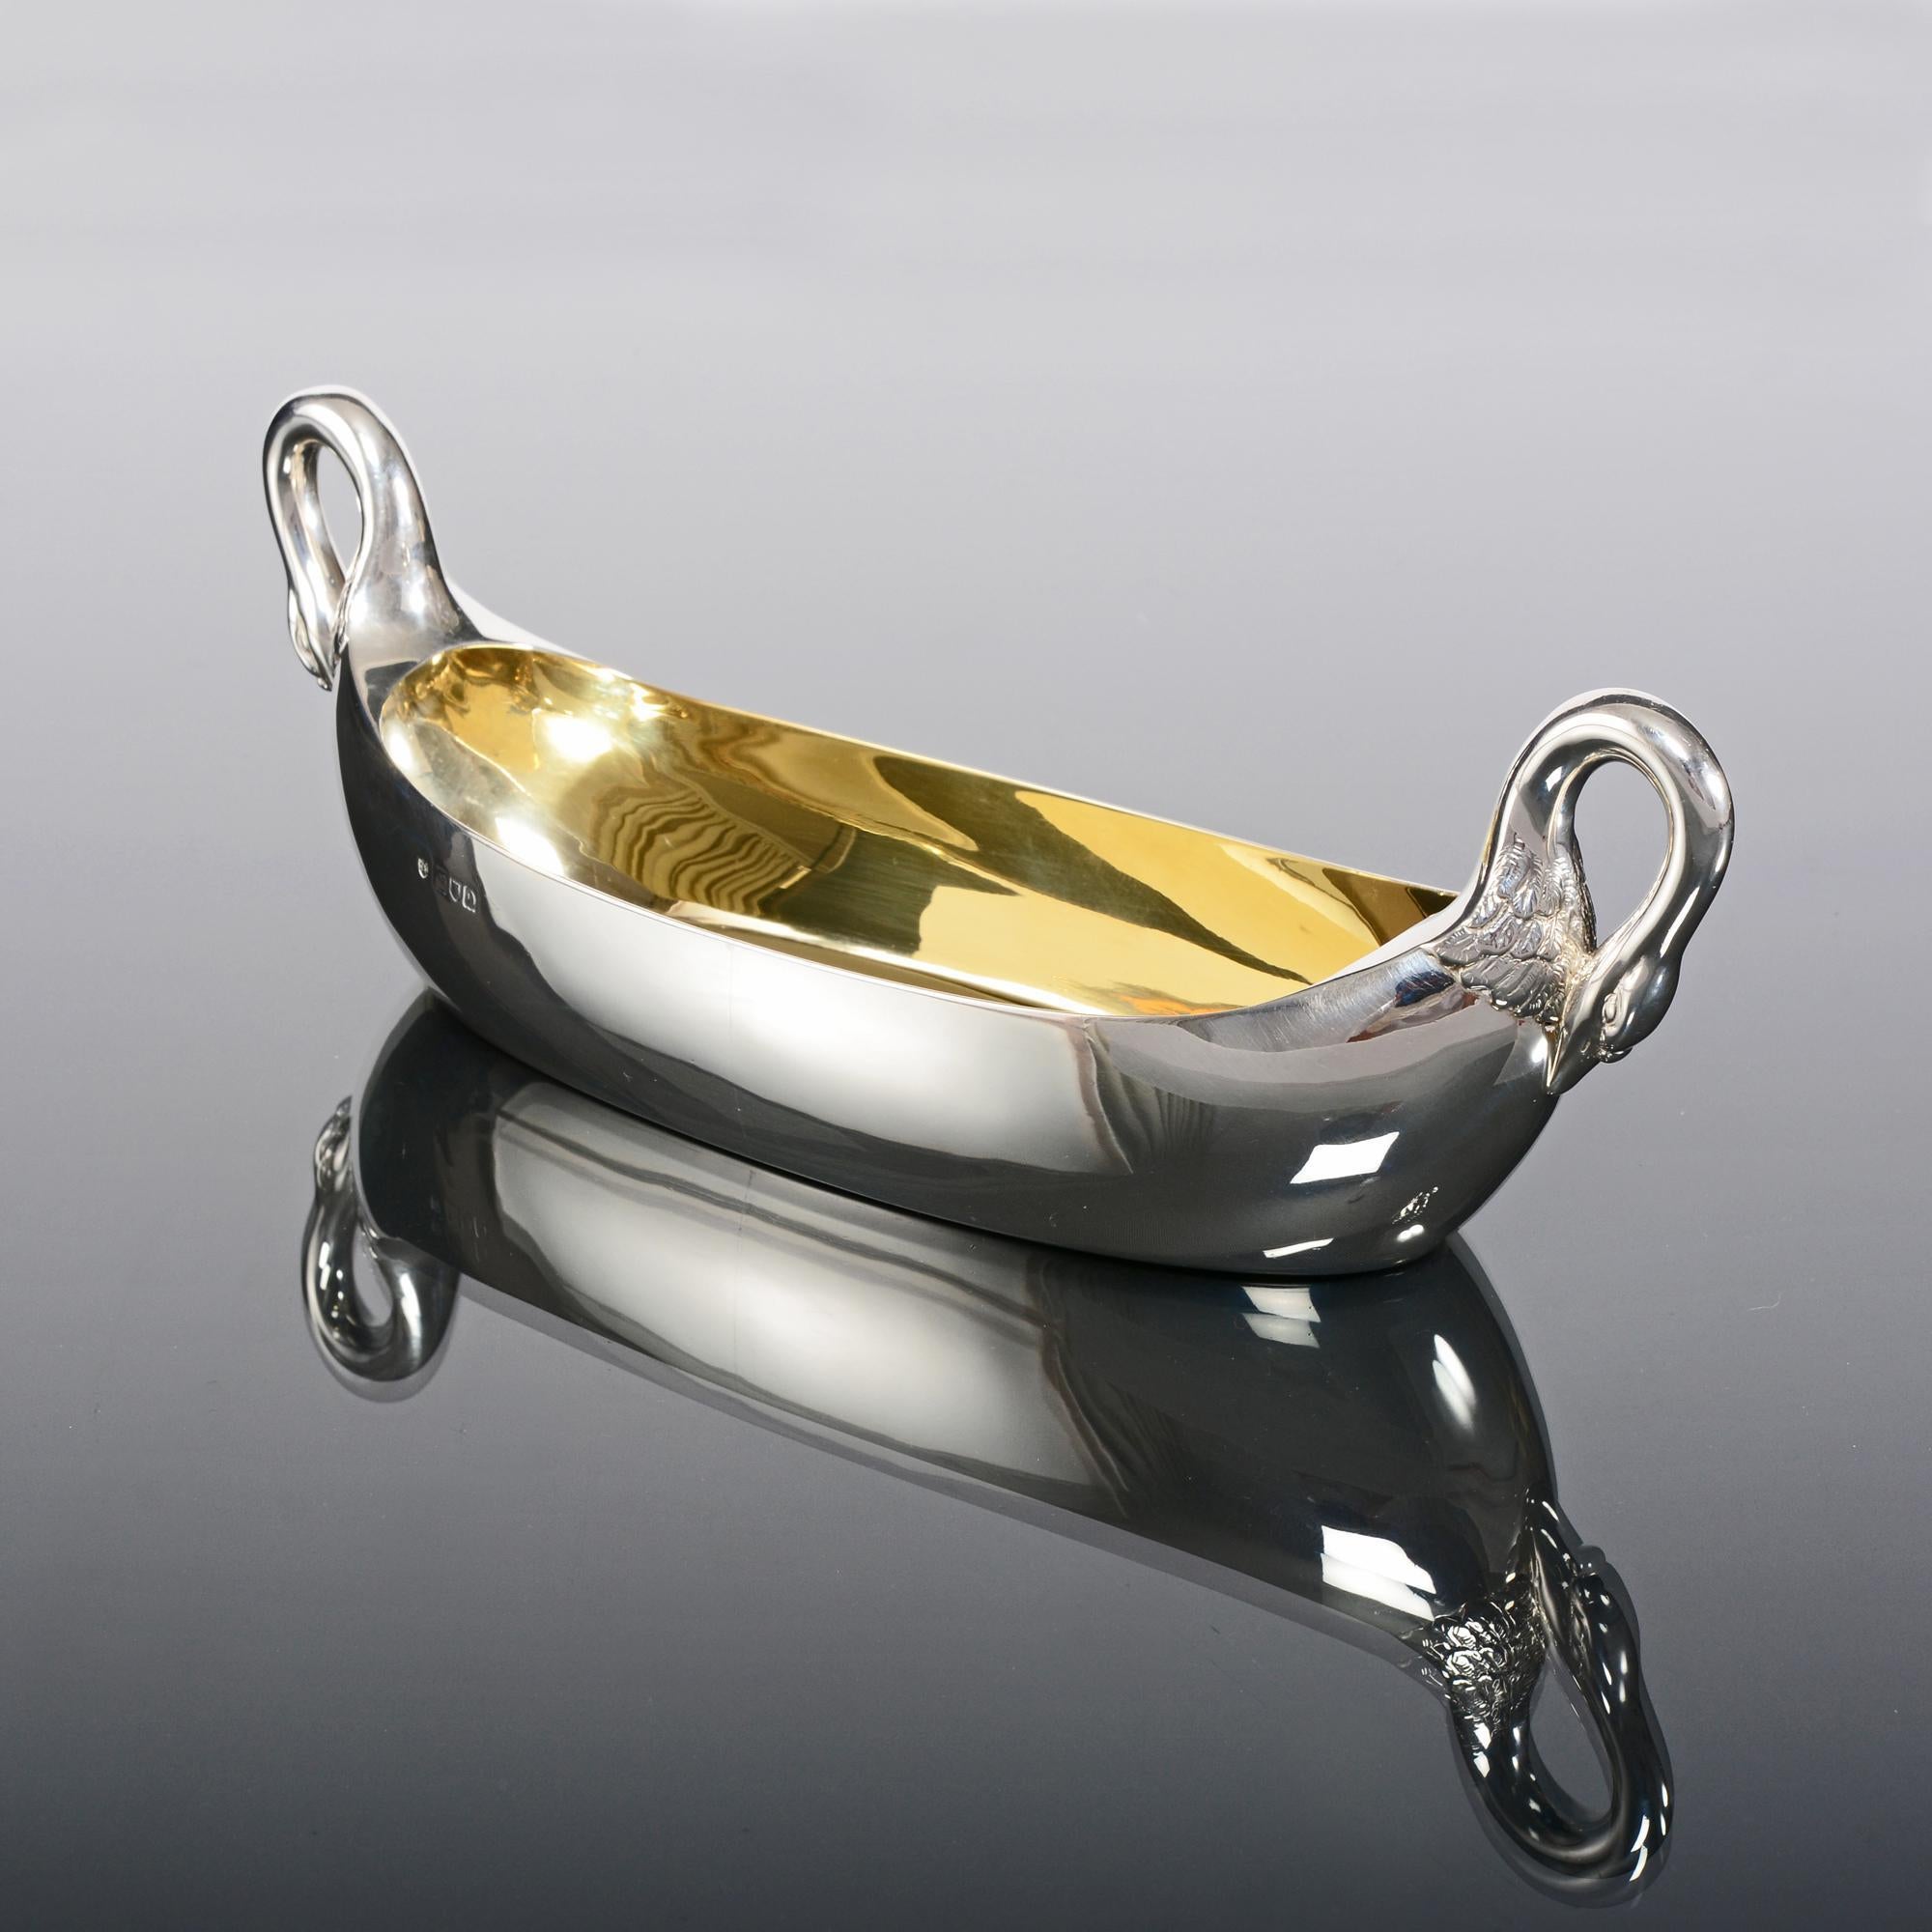 A most elegant boat-shaped silver sweet dish fitted with charming cast and hand chased swan handles and a gilded interior.

Since ancient times, swans have been associated with tranquillity and nobility, featuring in mythology and folklore around